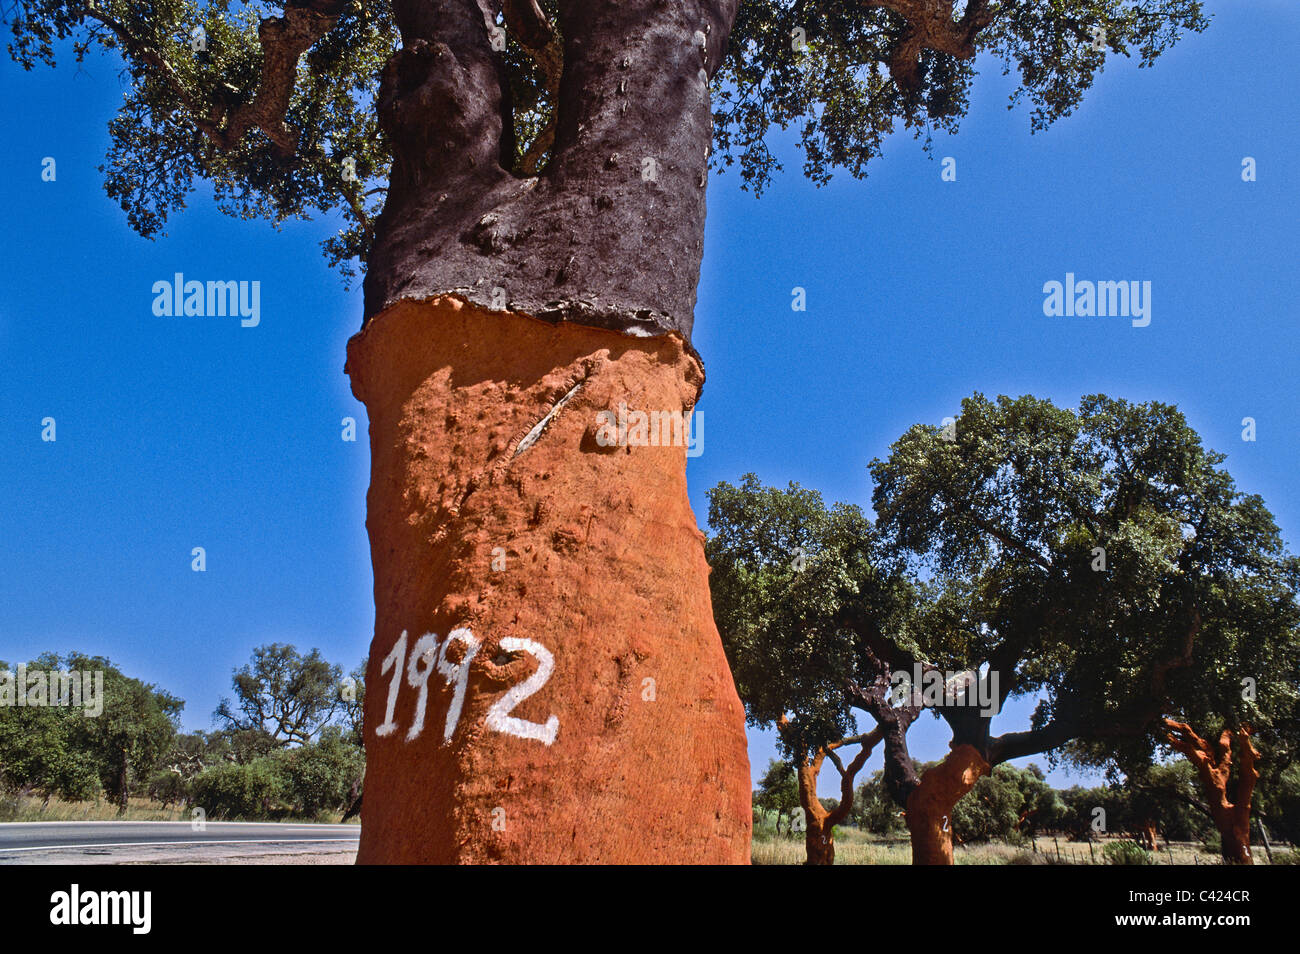 The cork oak (Quercus suber L.) grows in central and southern Portugal, Alentejo area of Portugal Stock Photo